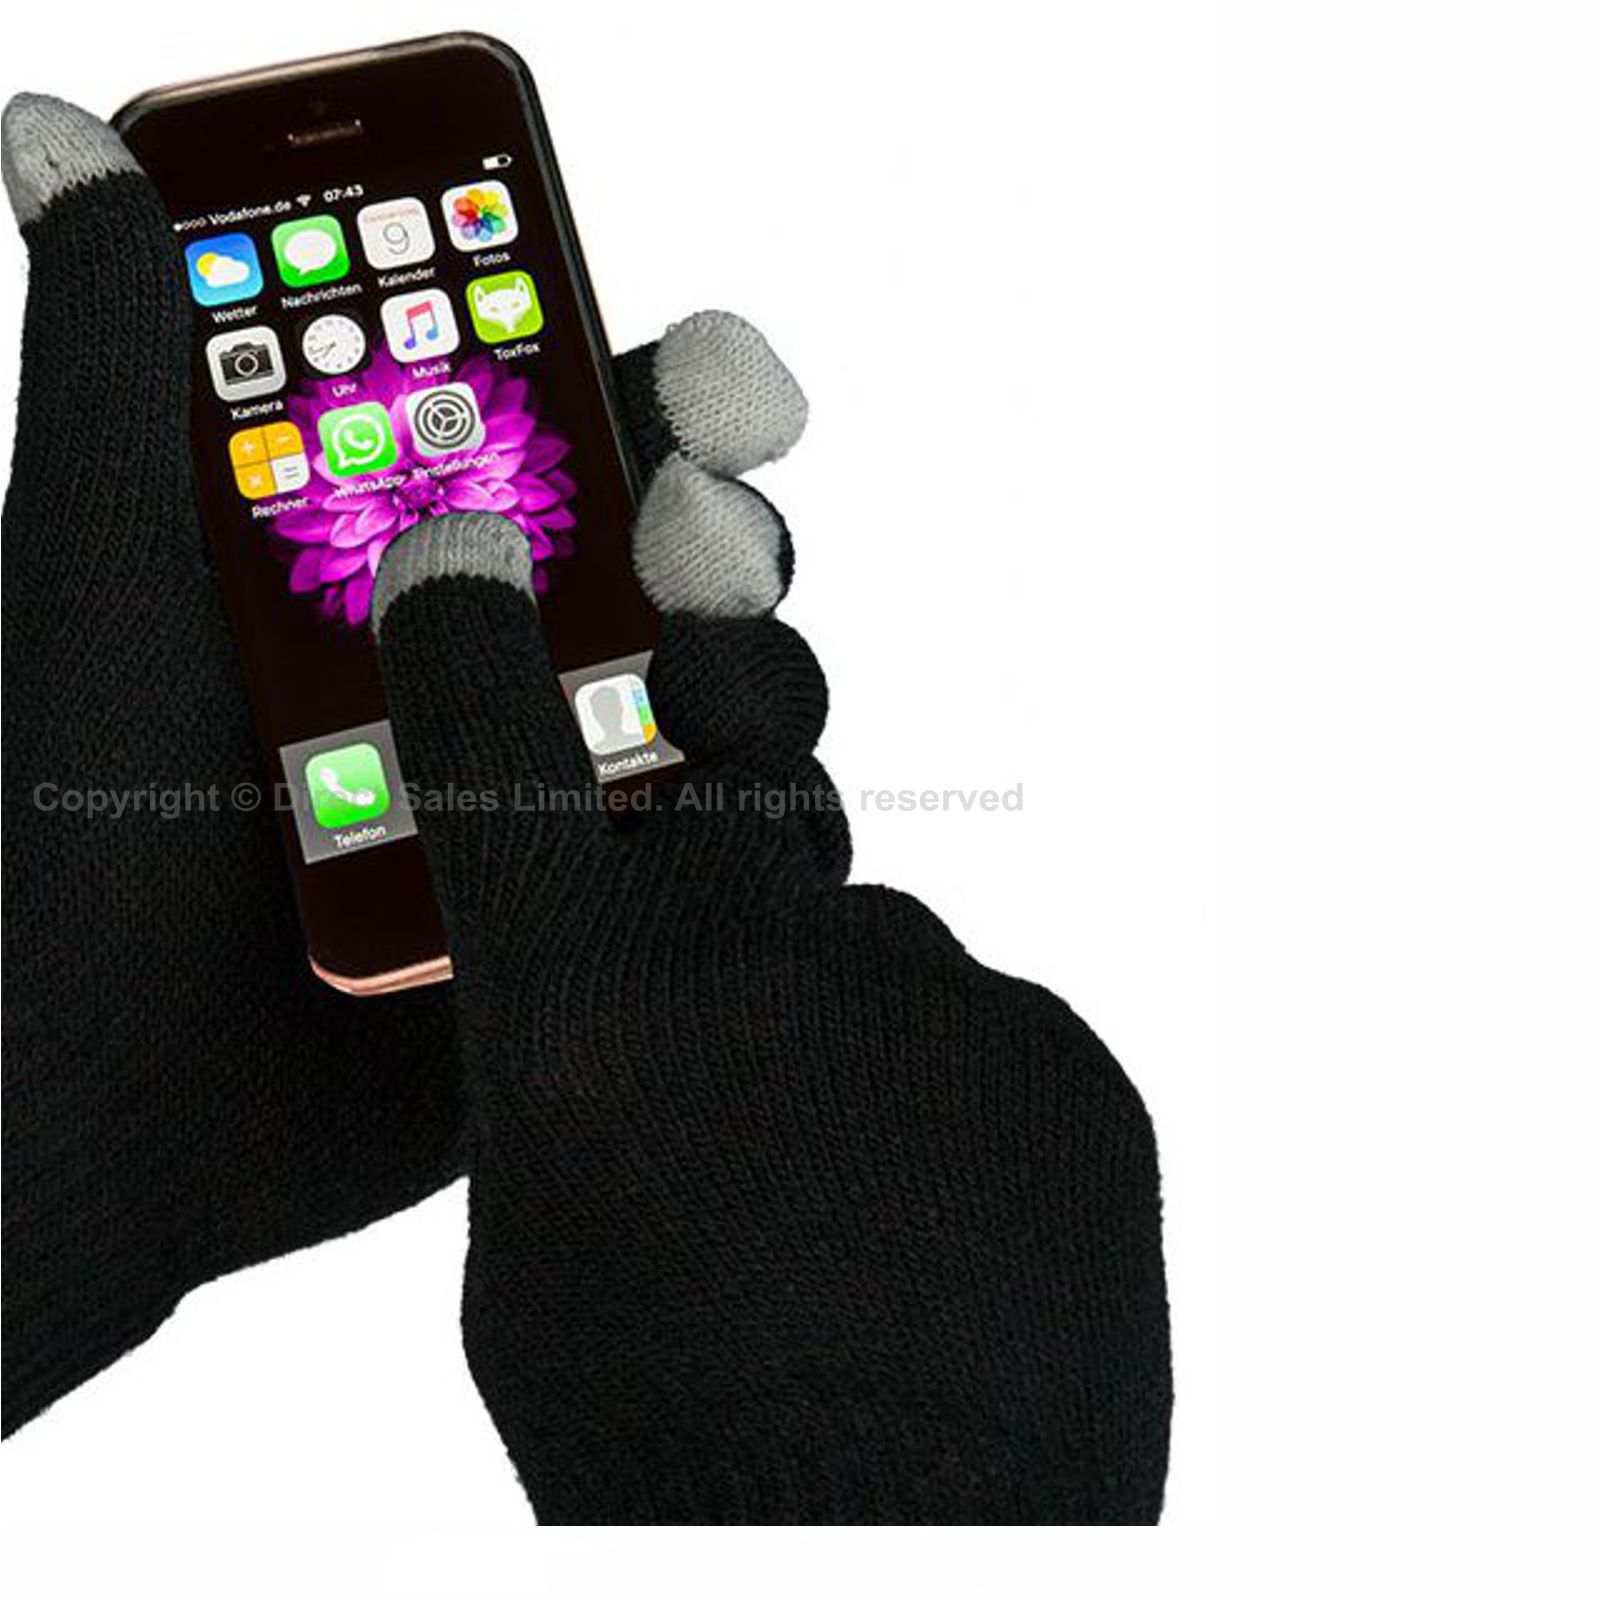 Mobile Phone Gloves - Unisex Winter Touch Screen iPhone iPad S3 Smart ...